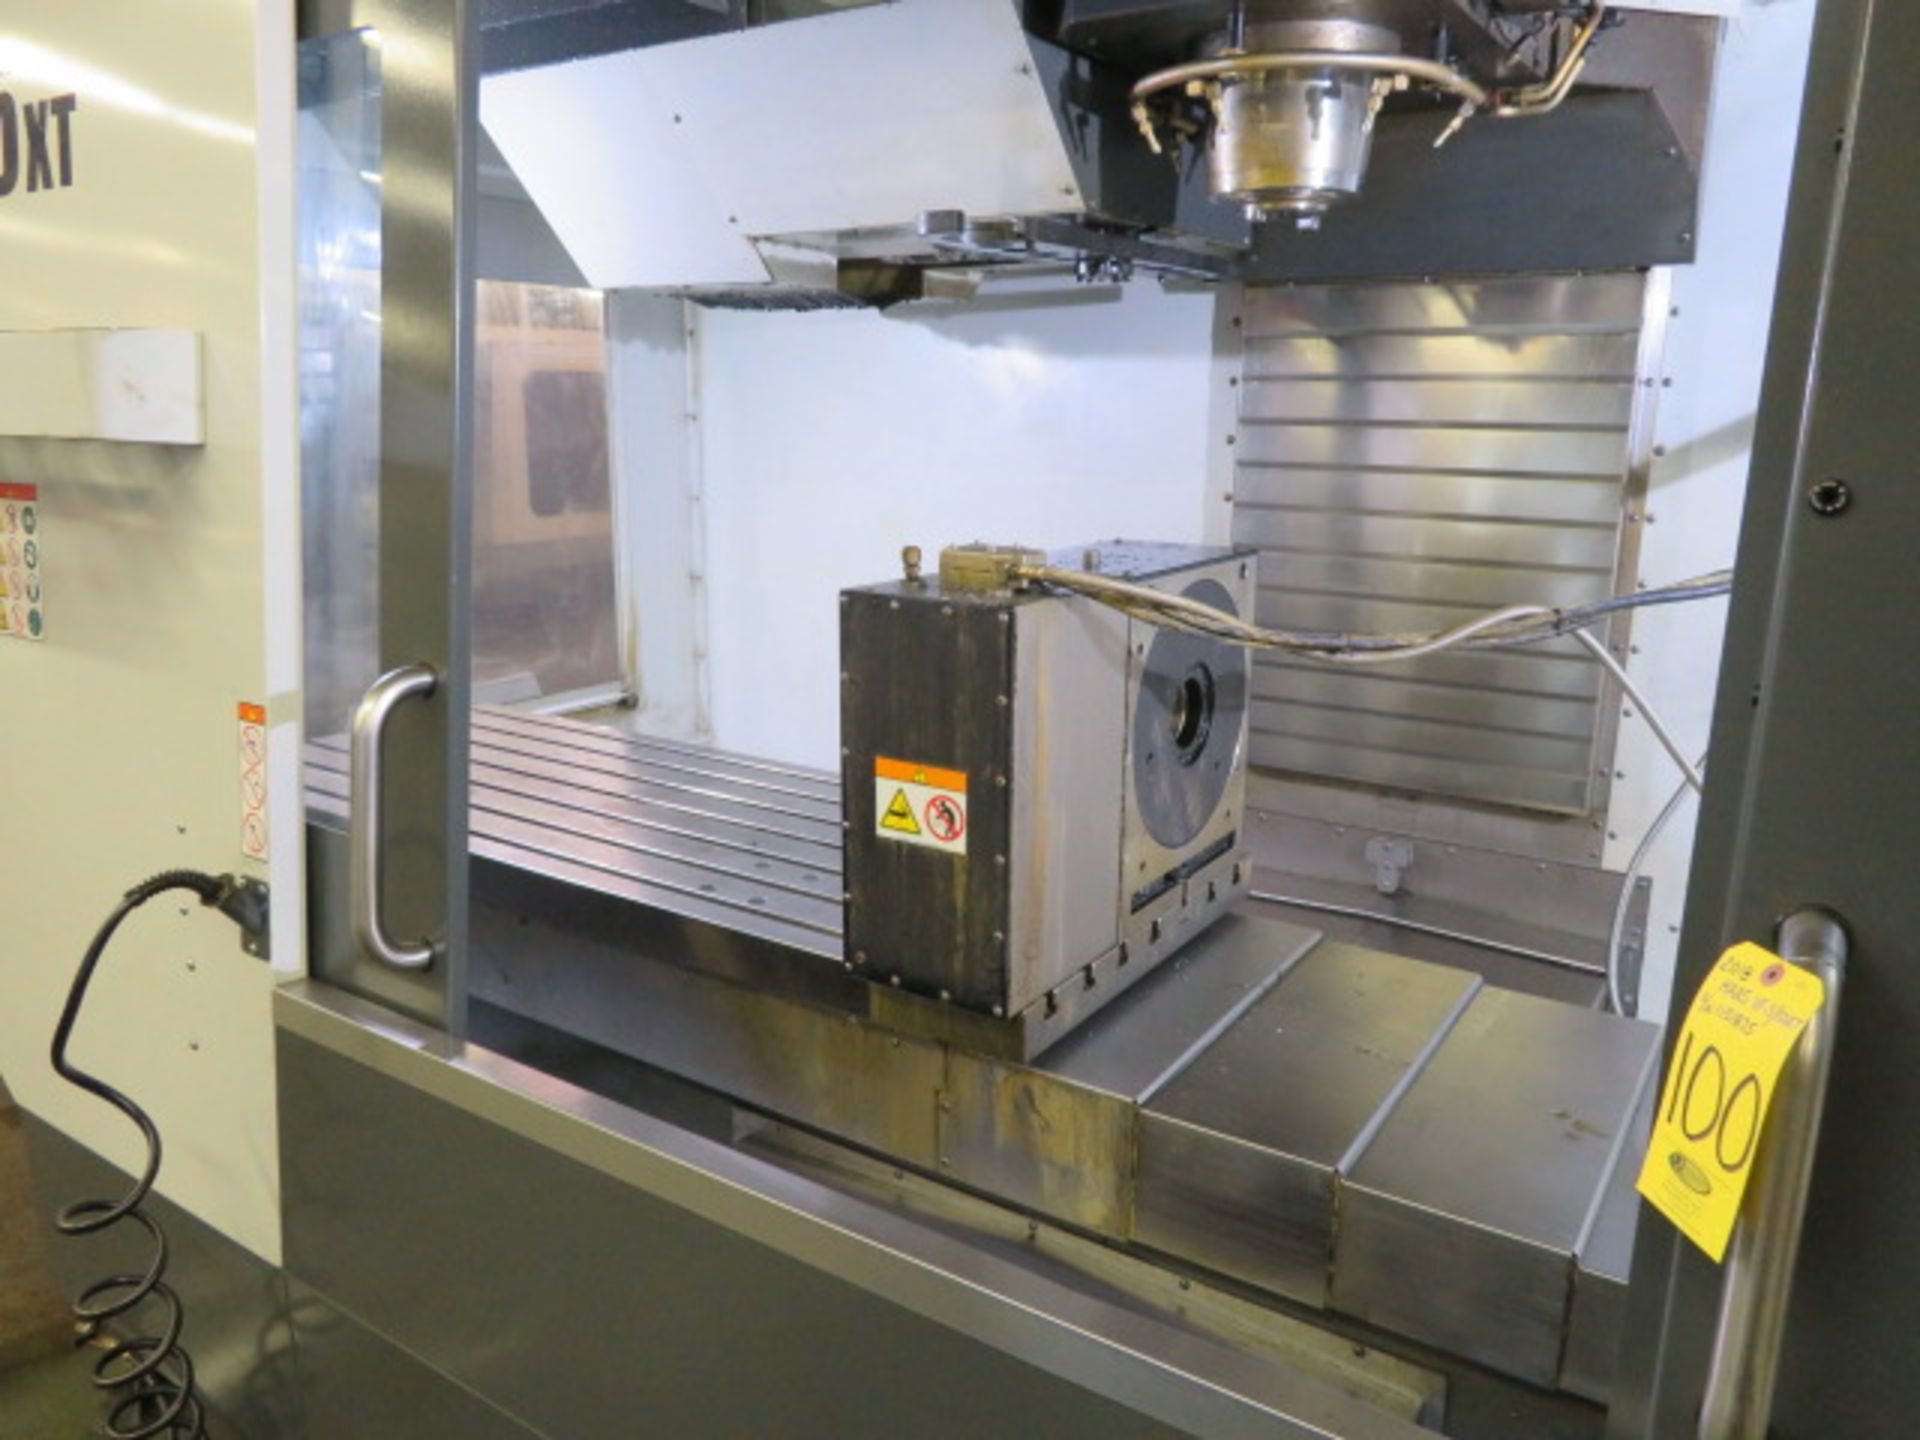 2018 HAAS VF5-50XT CNC Vertical Machining Center, S/N 1151875, HAAS Control, 4TH AXIS ENABLED - Image 2 of 11